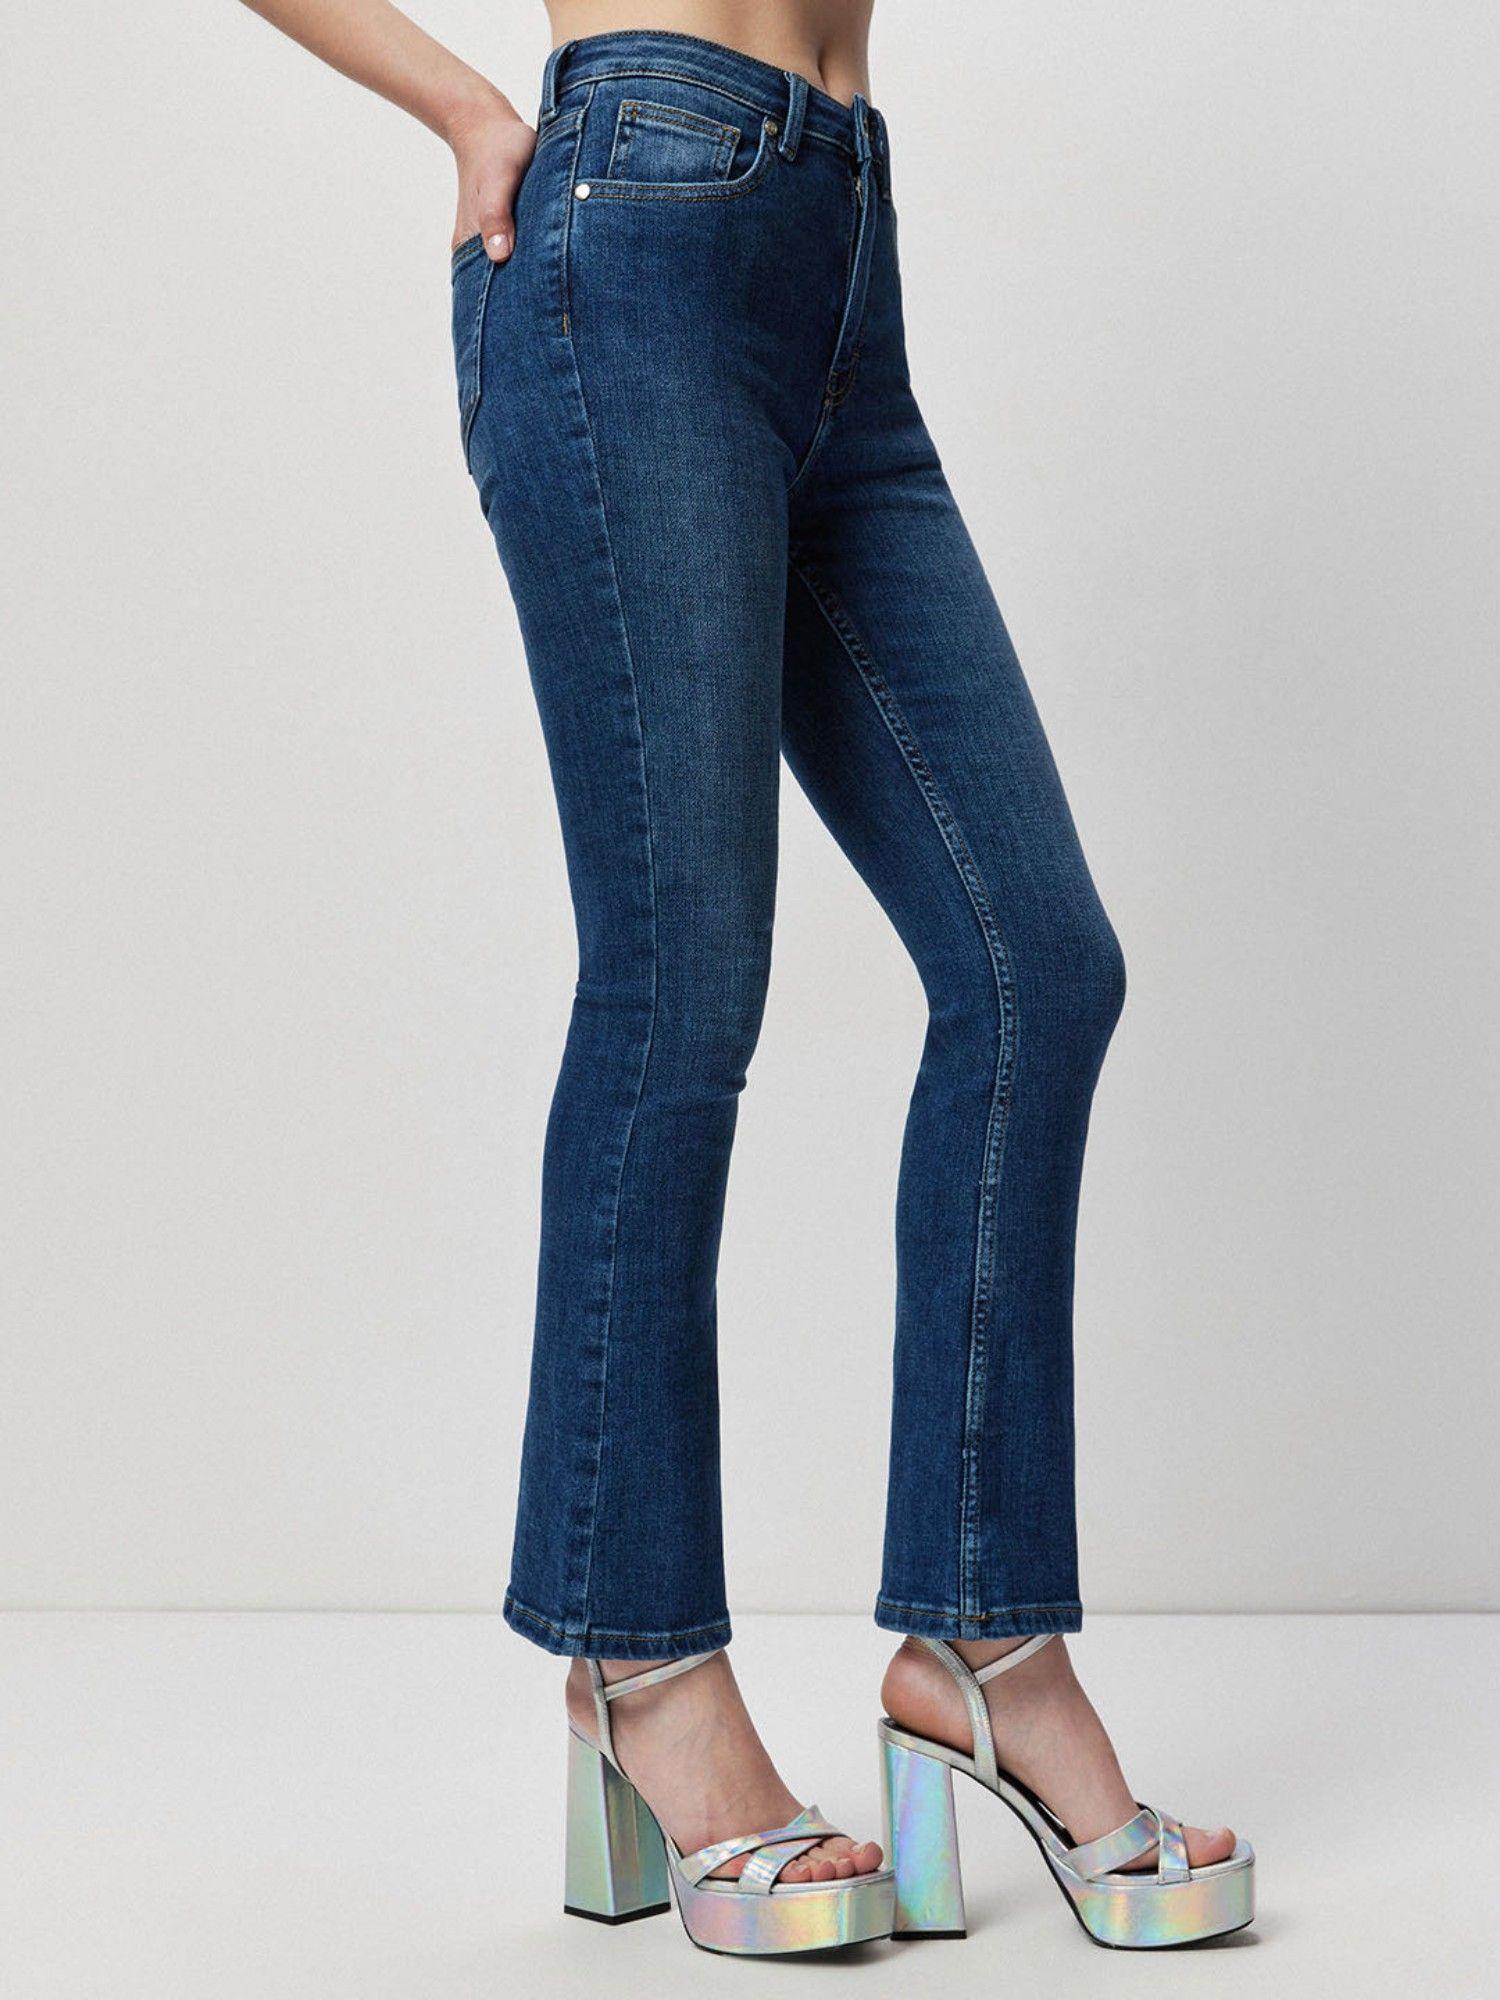 blue bootcut ankle length jeans